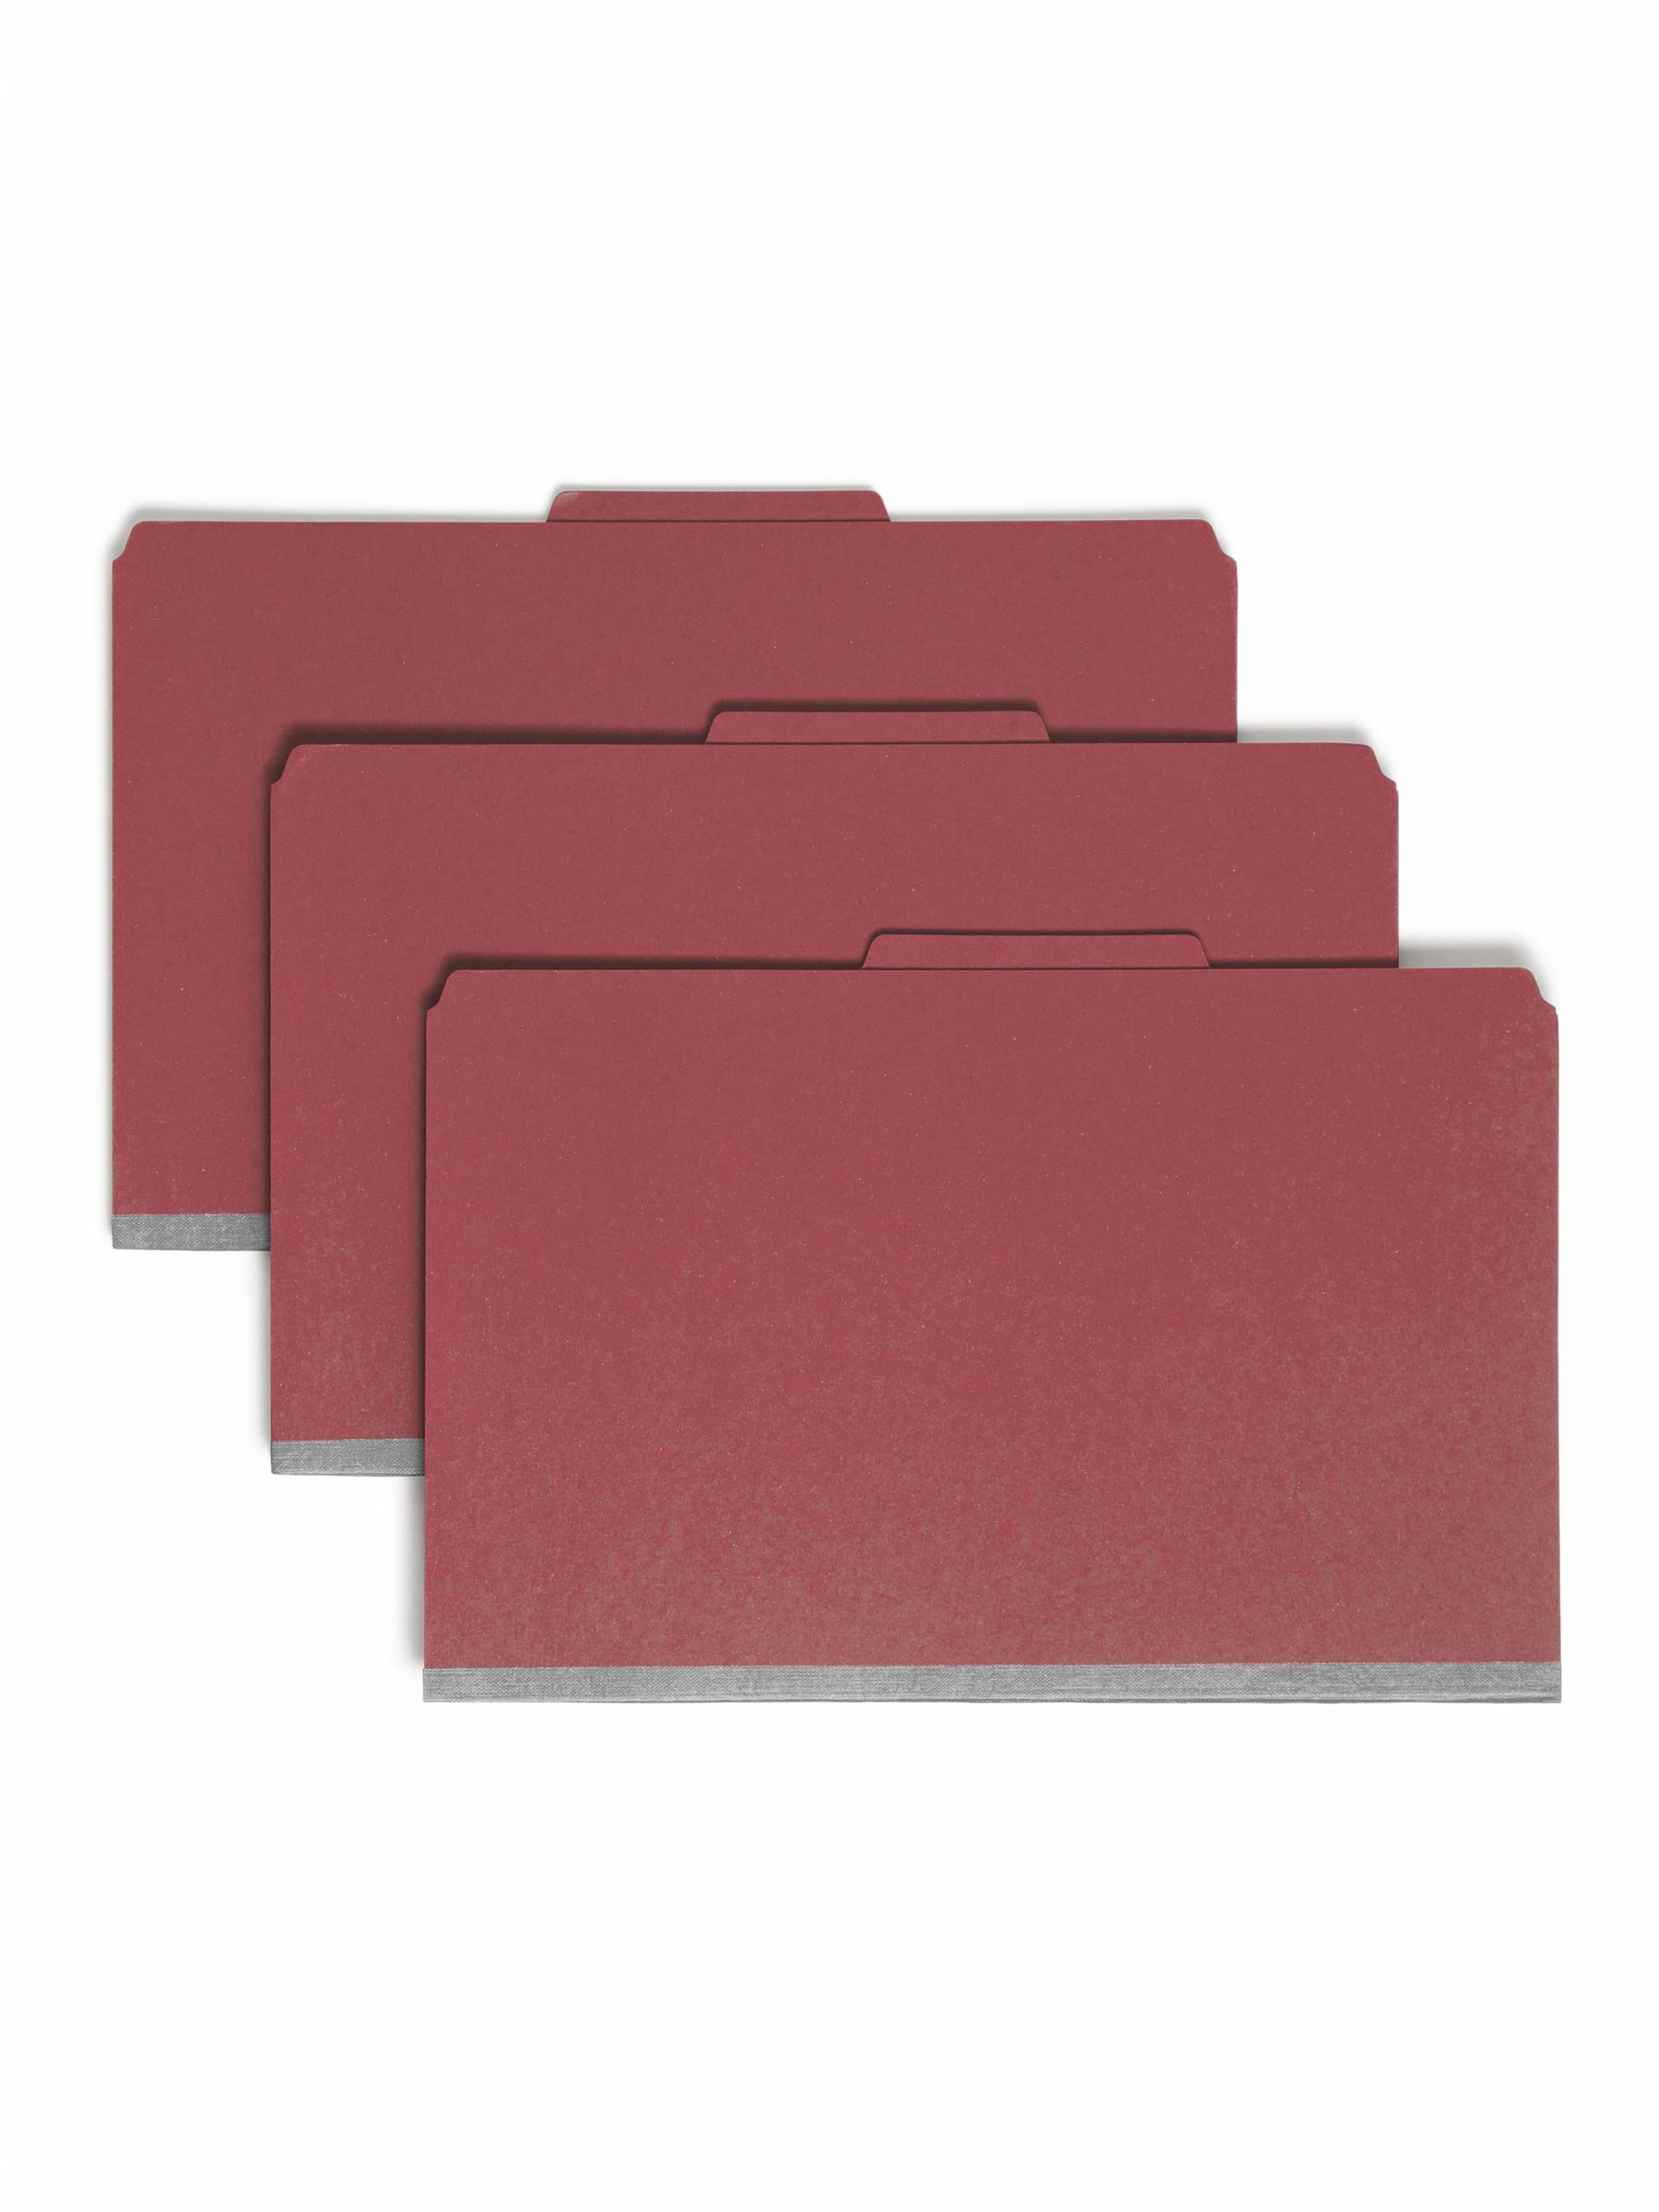 SafeSHIELD® Pressboard Classification File Folders with Pocket Dividers, Bright Red Color, Legal Size, 